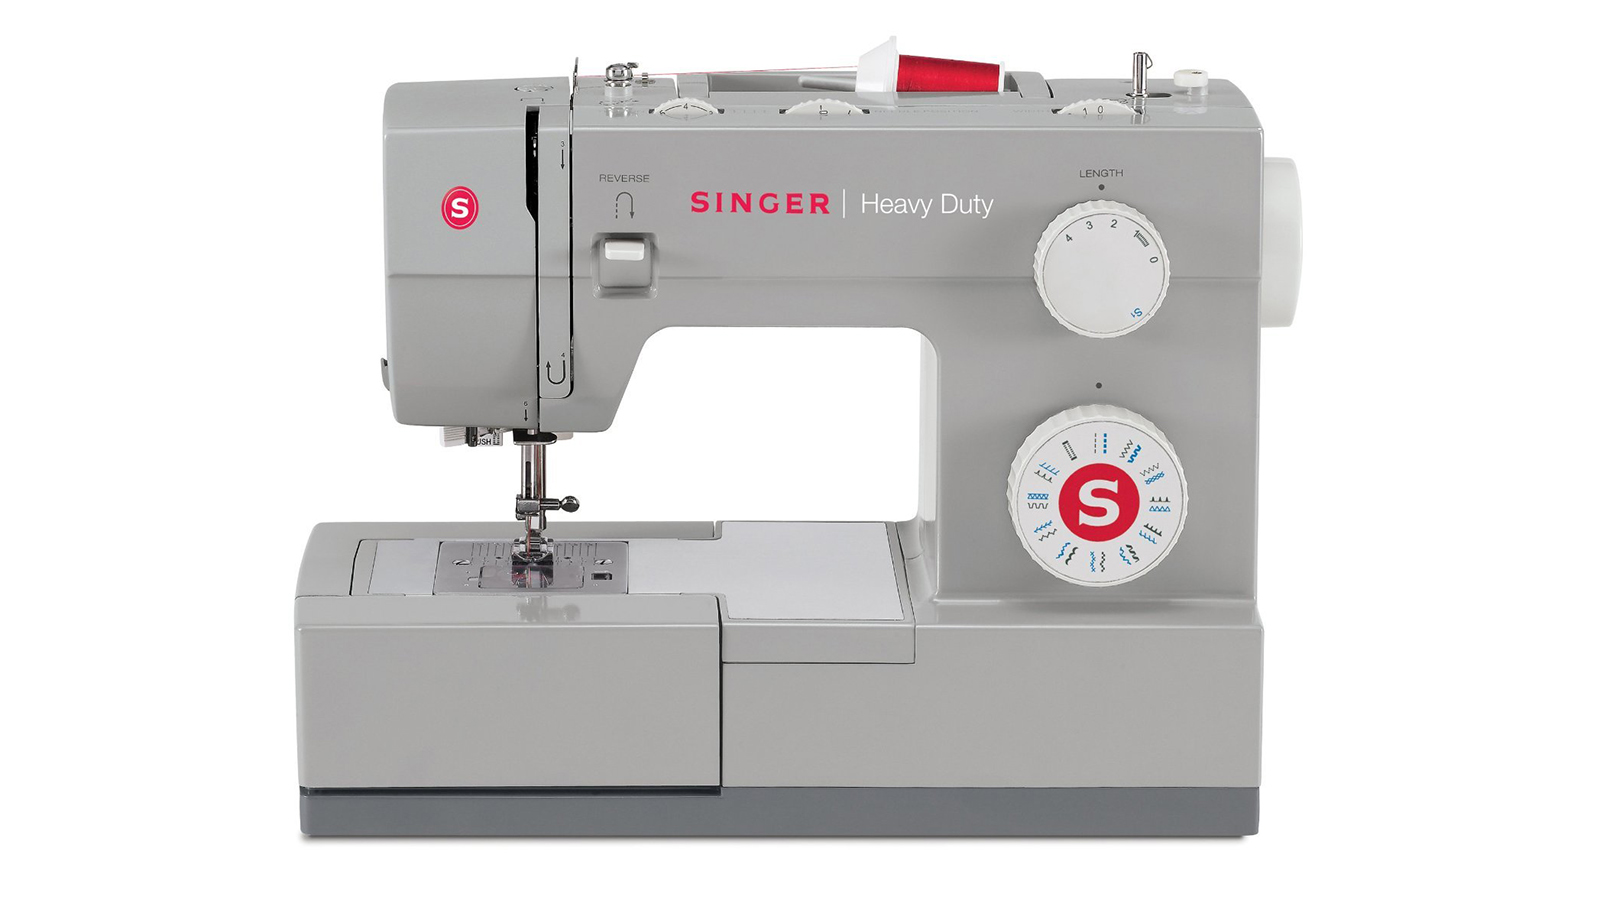 Singer Heavy Duty 4423 sewing machine: capable of stitching up to 1,100 stitches per minute